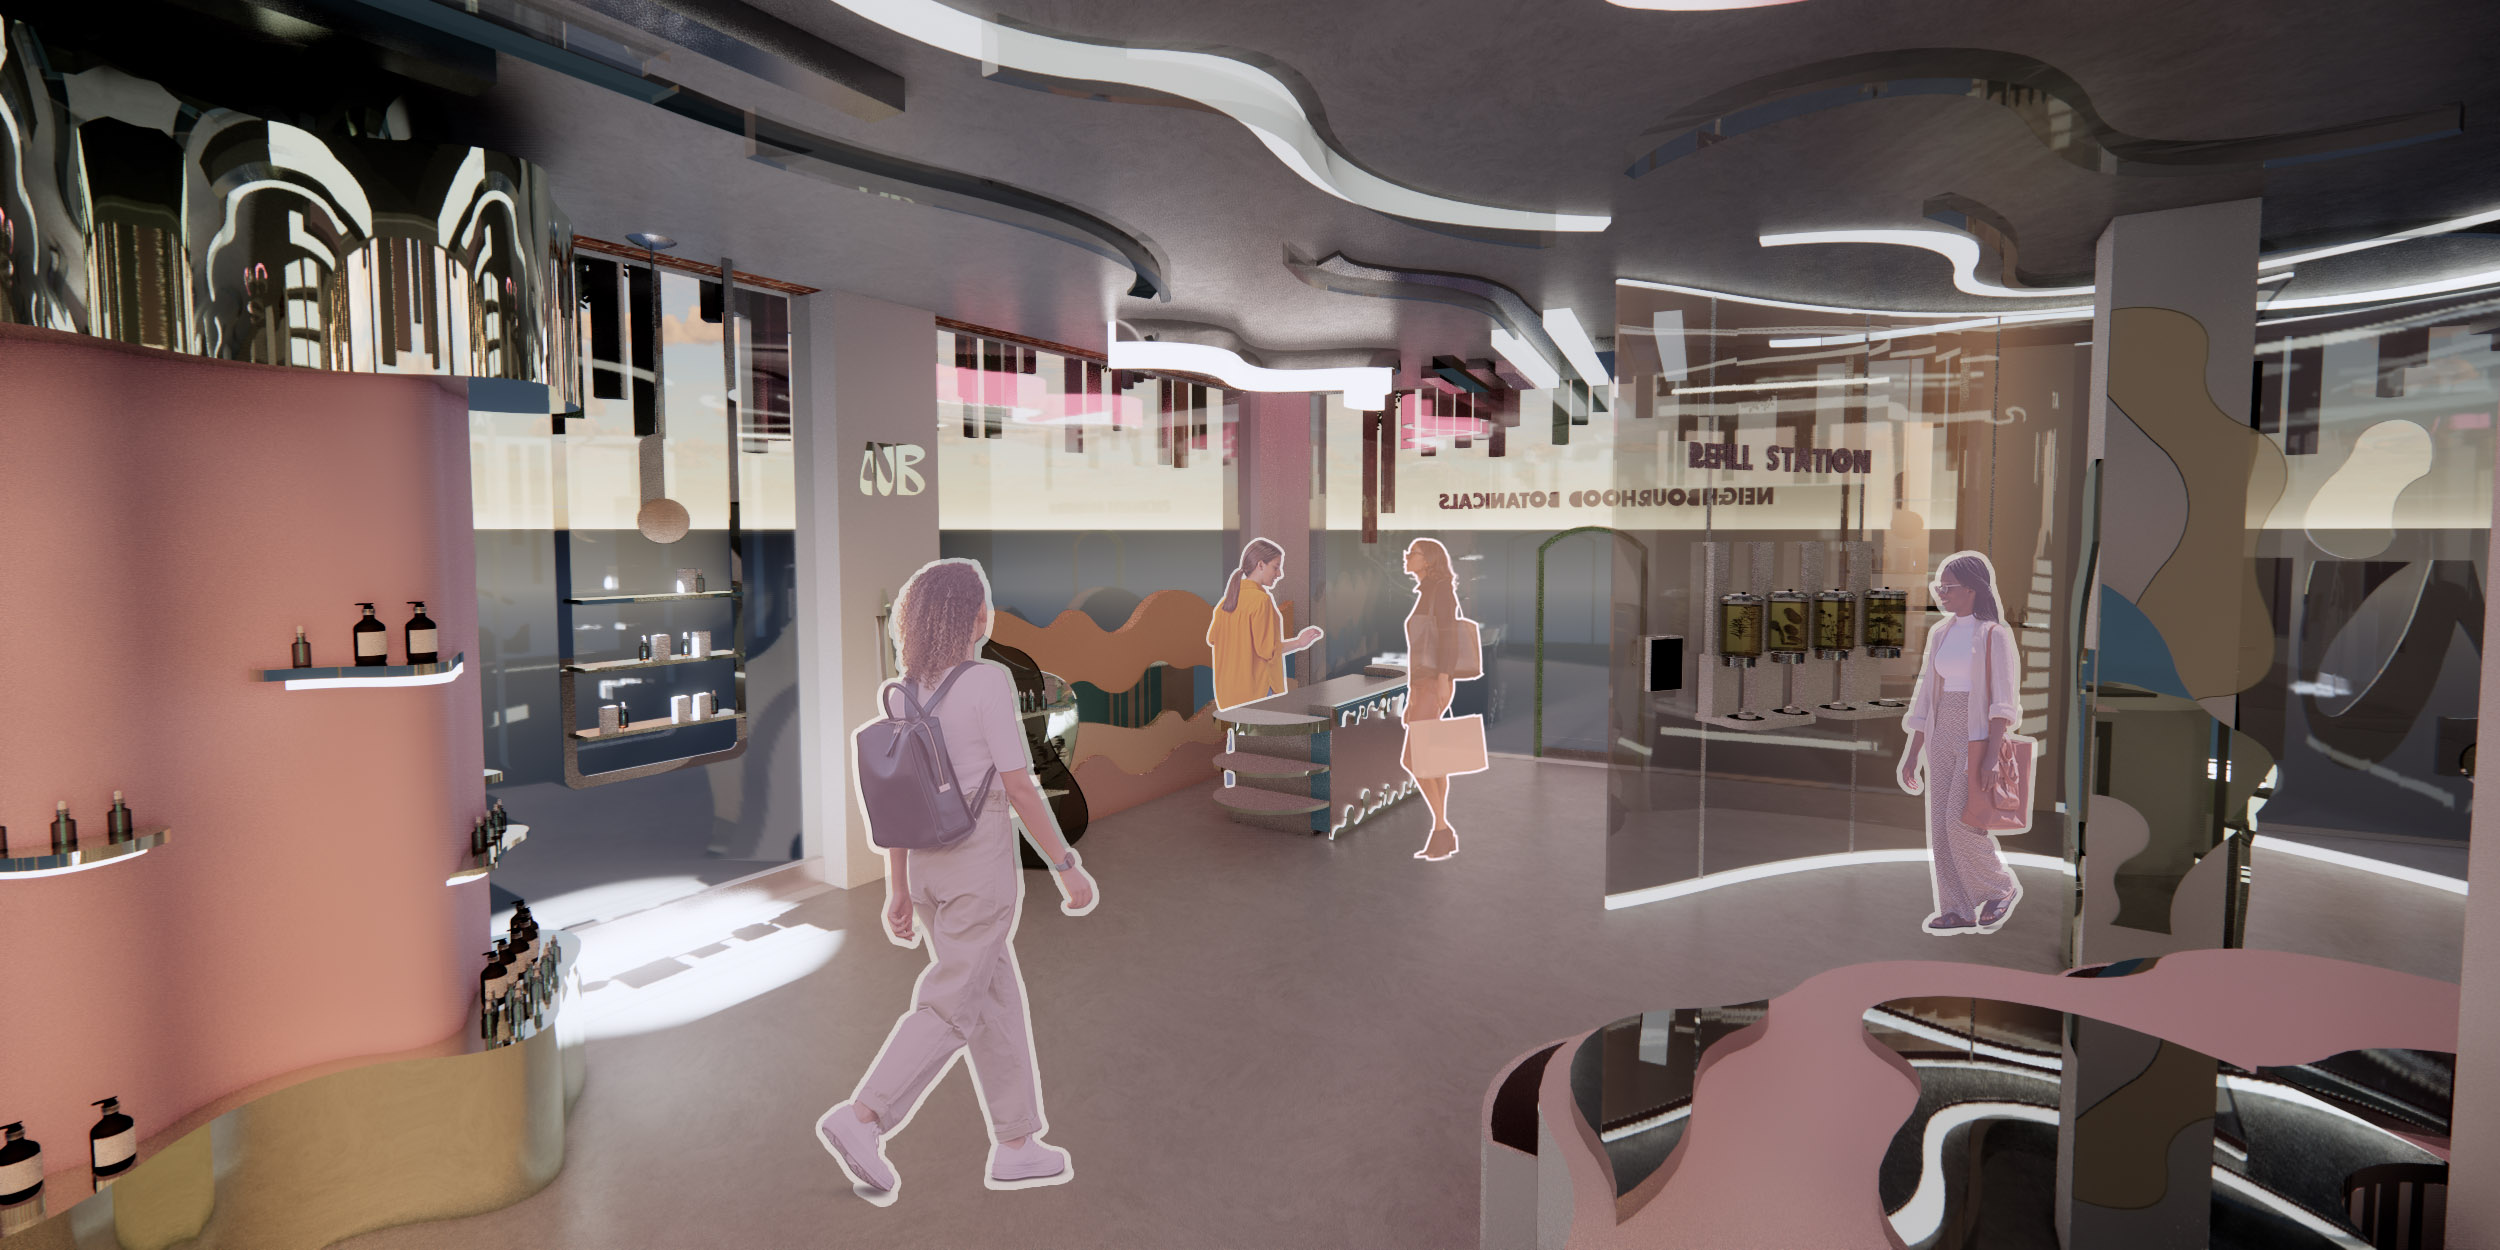 Interior space showing ground floor render of shop by Emily Day. Space has lots of curves in walls and lighting and dusty pink colouring.